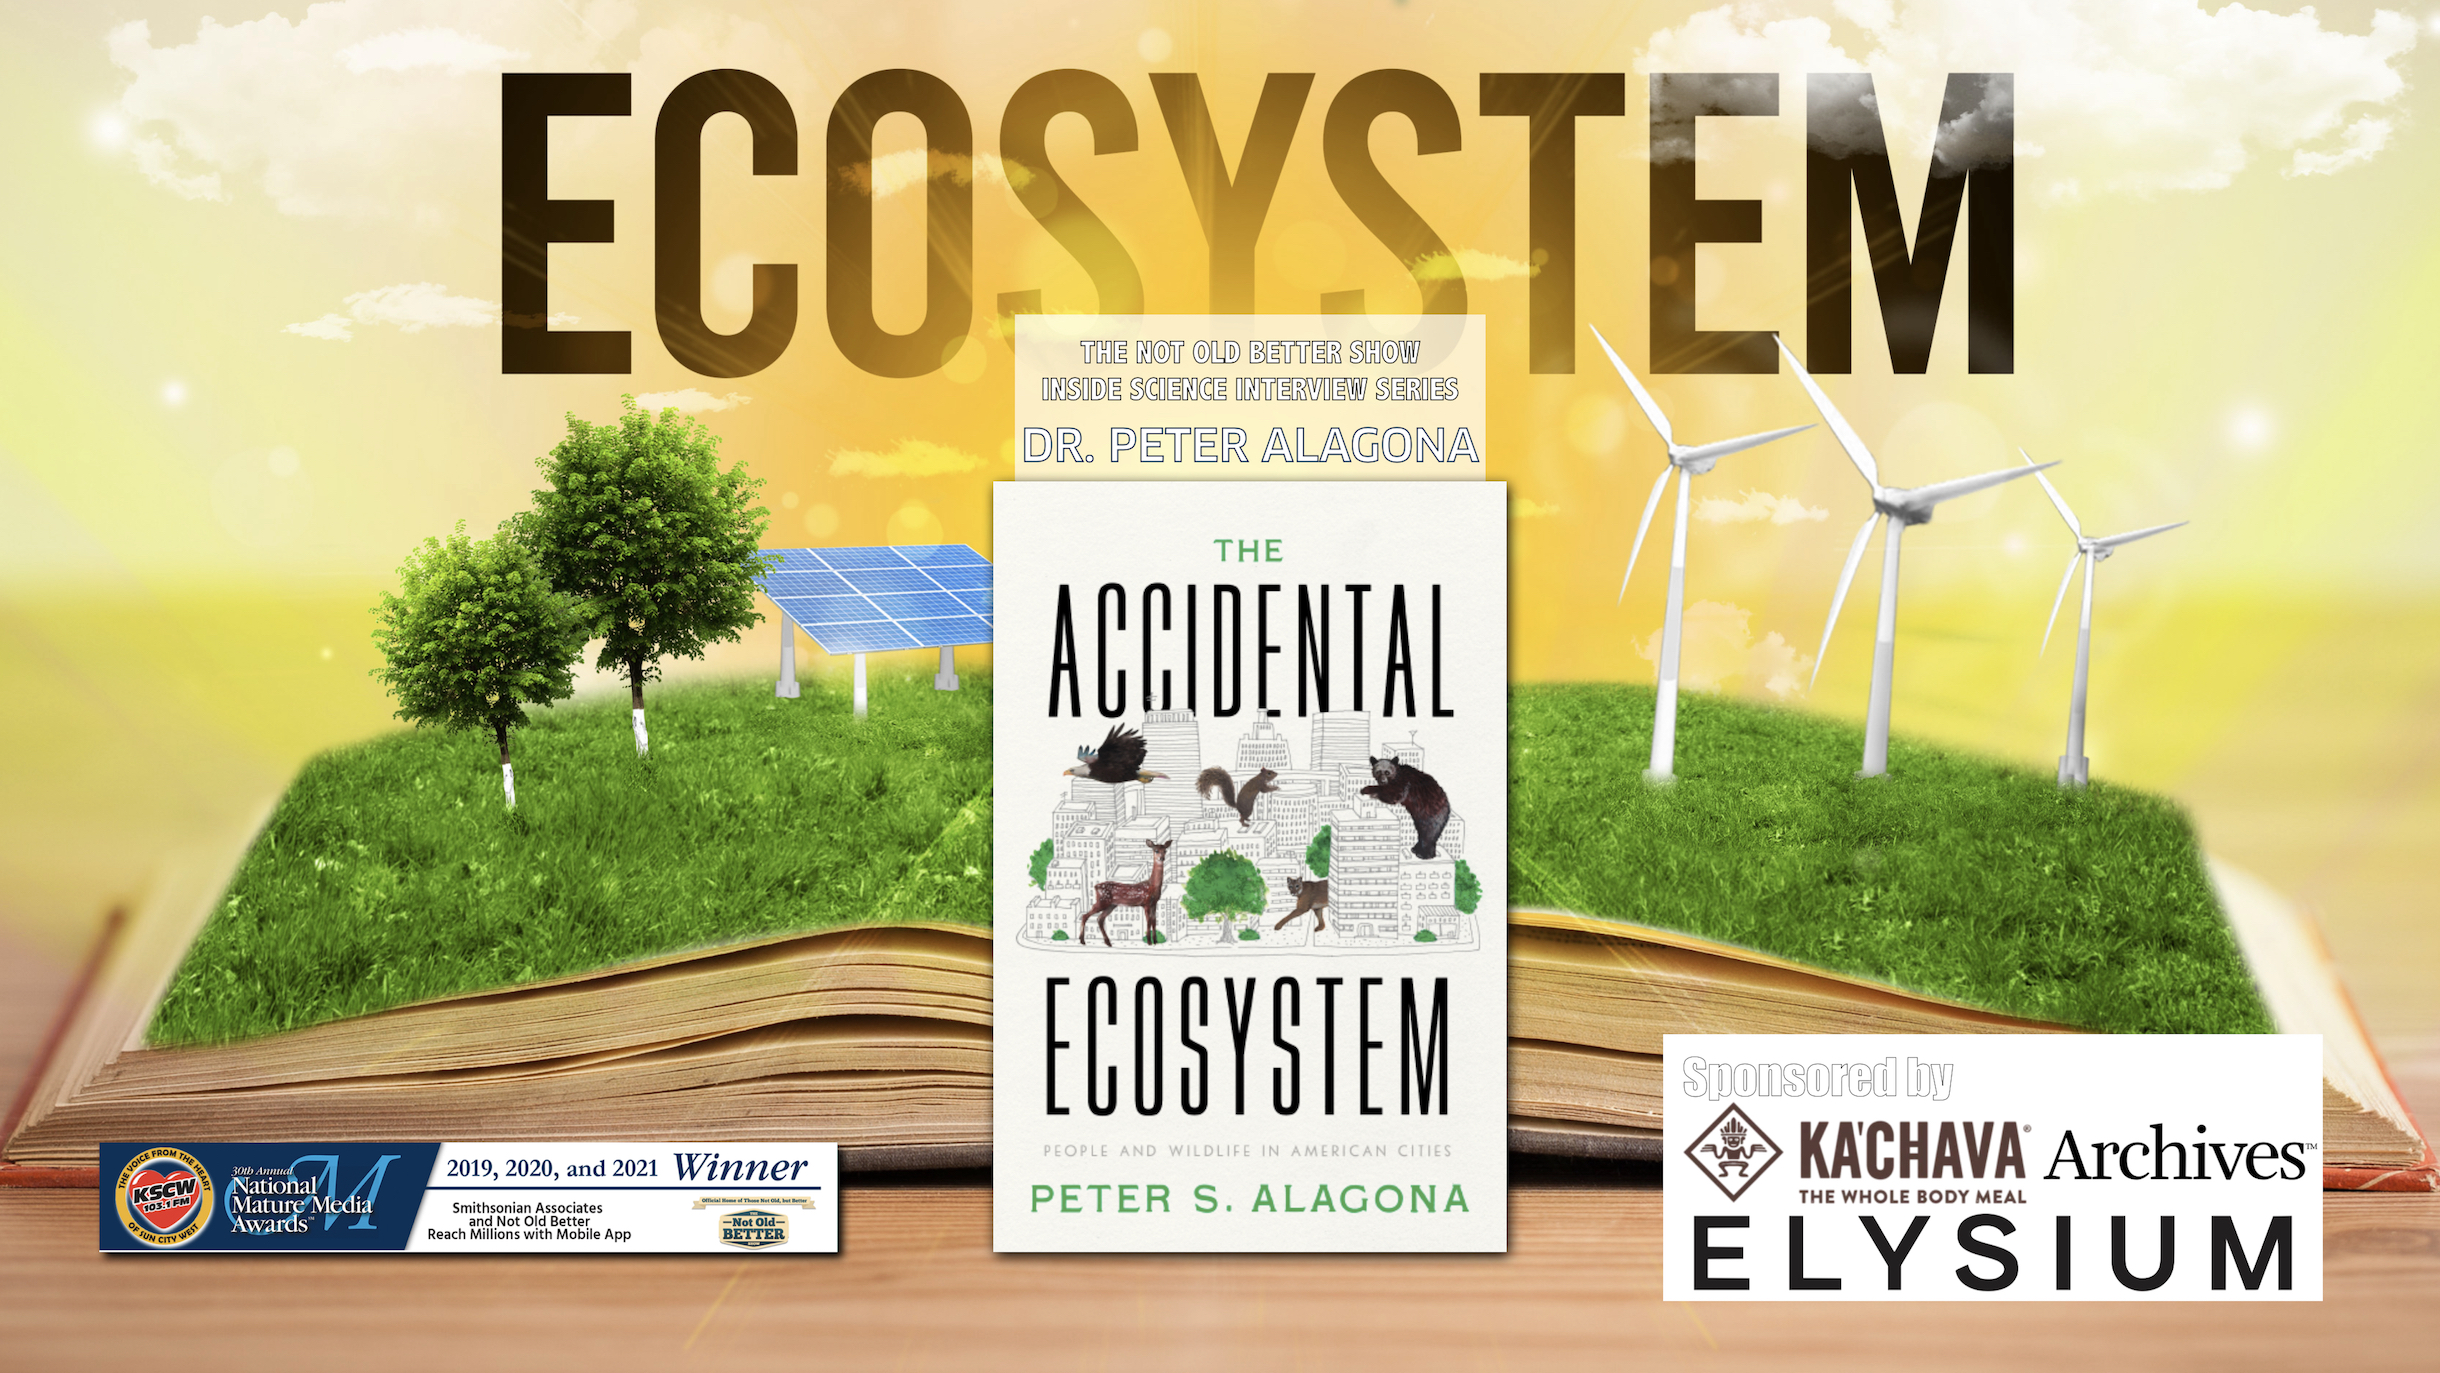 The Accidental Ecosystem – Dr. Peter Alagona